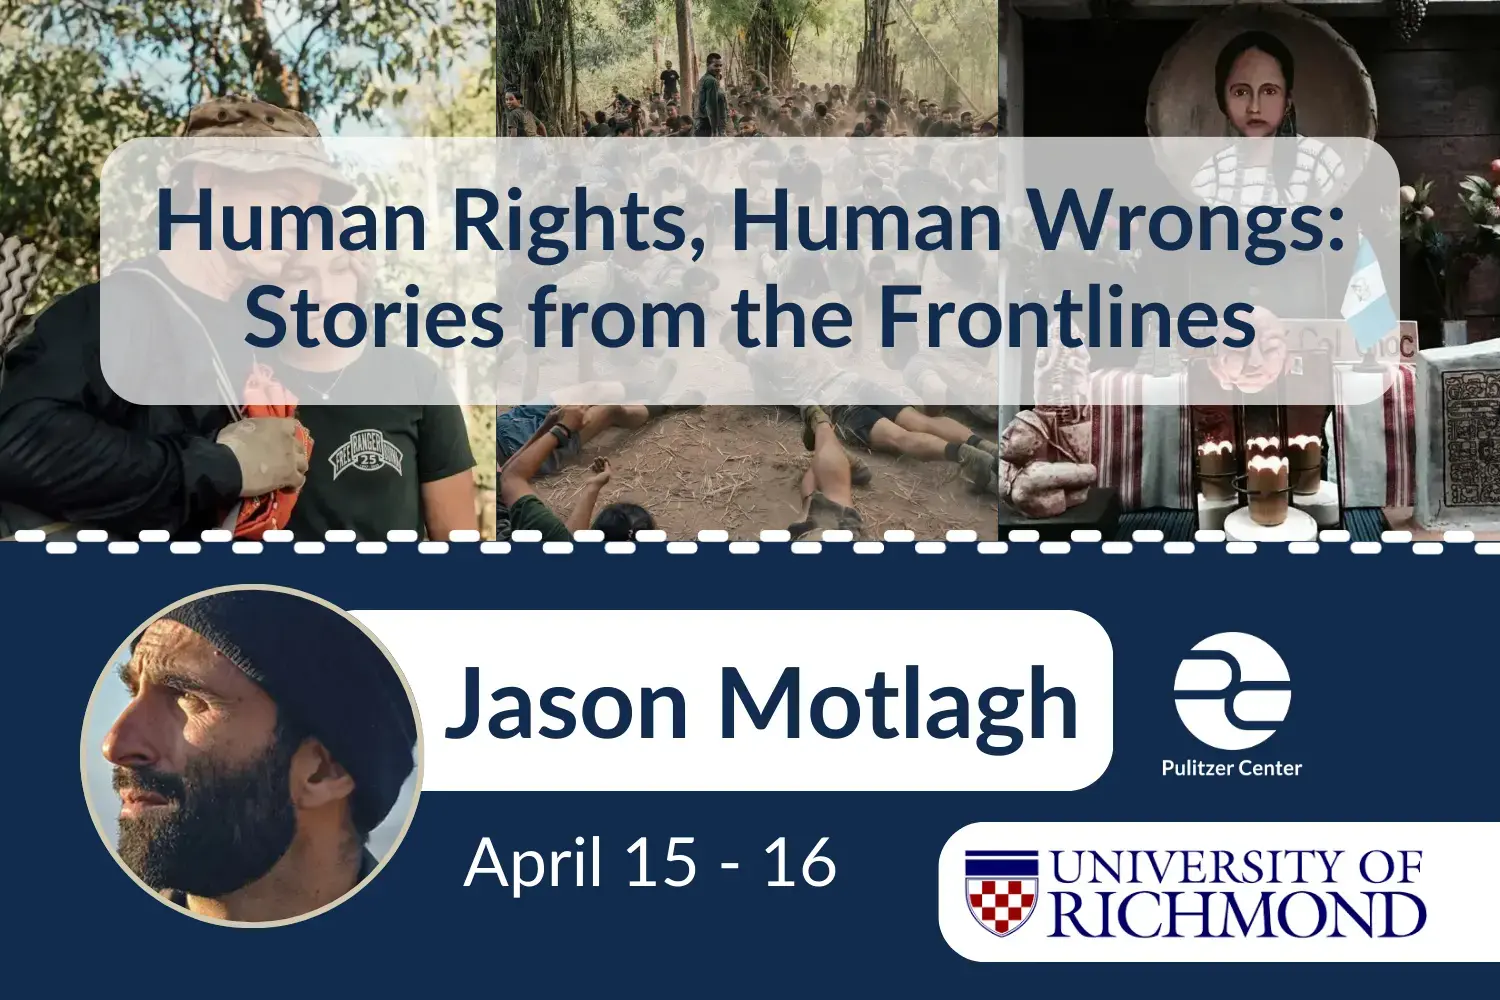 Jason Motlagh on “Human Rights, Human Wrongs: Stories from the Frontlines” at University of Richmond